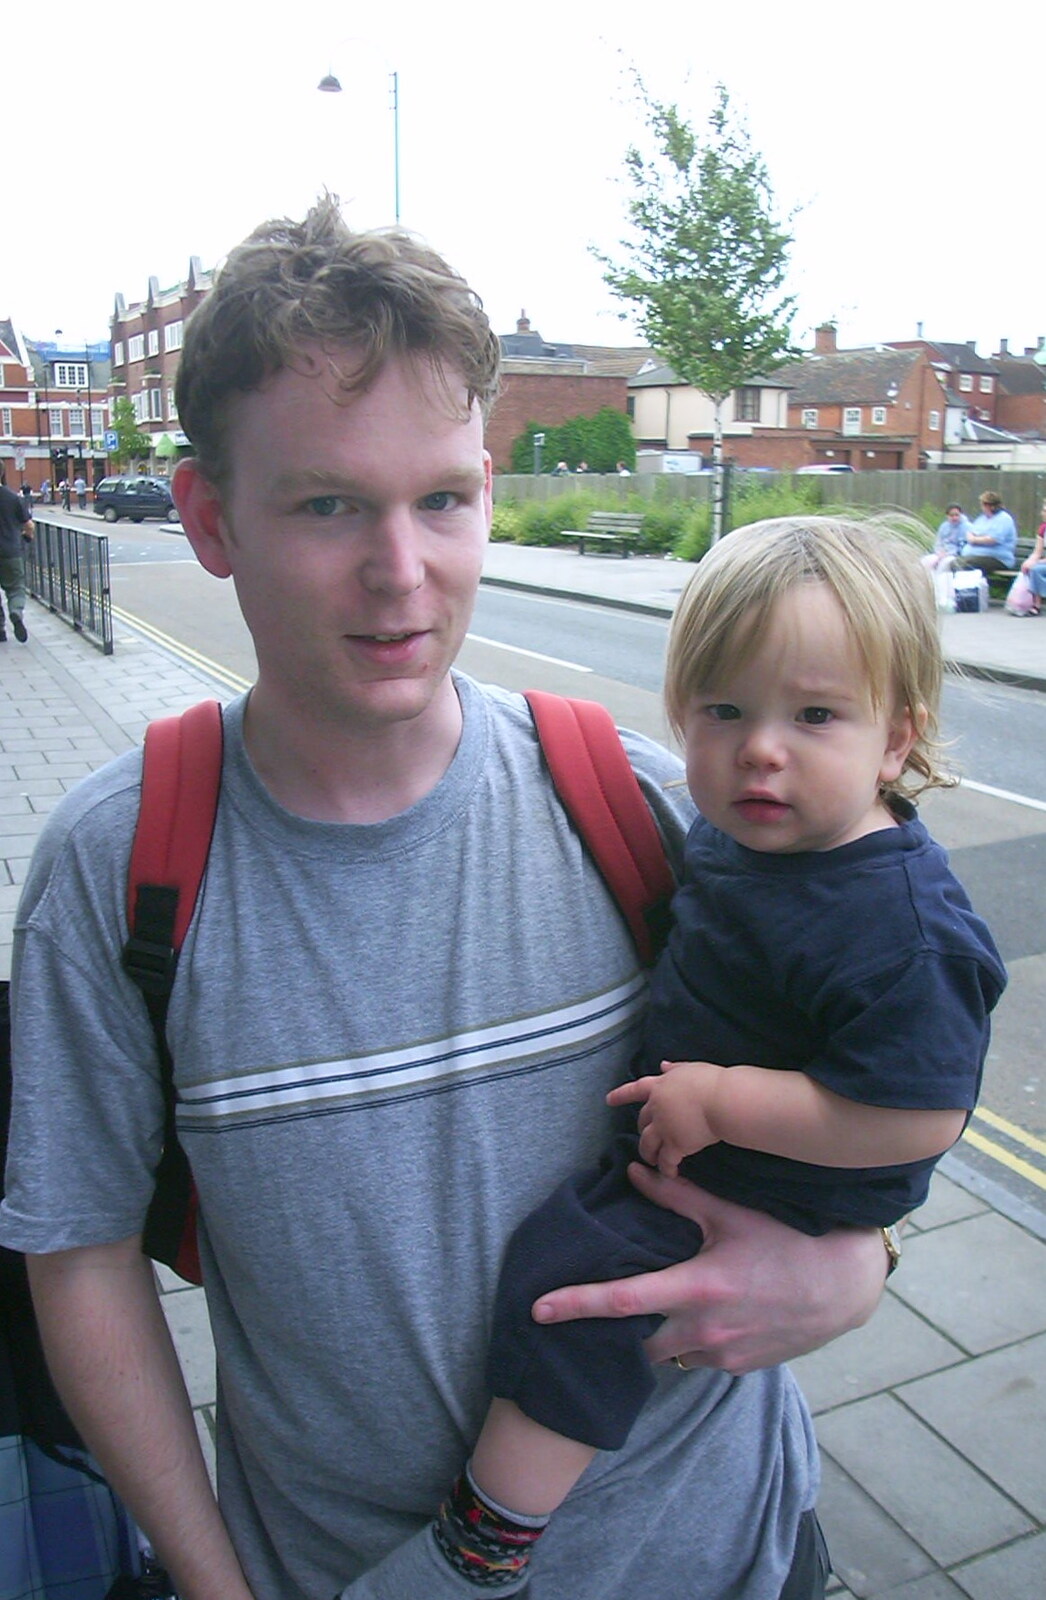 Joe and his sprog on Tacket Street from Radio 1's One Big Sunday, Chantry Park, Ipswich - 14th July 2002